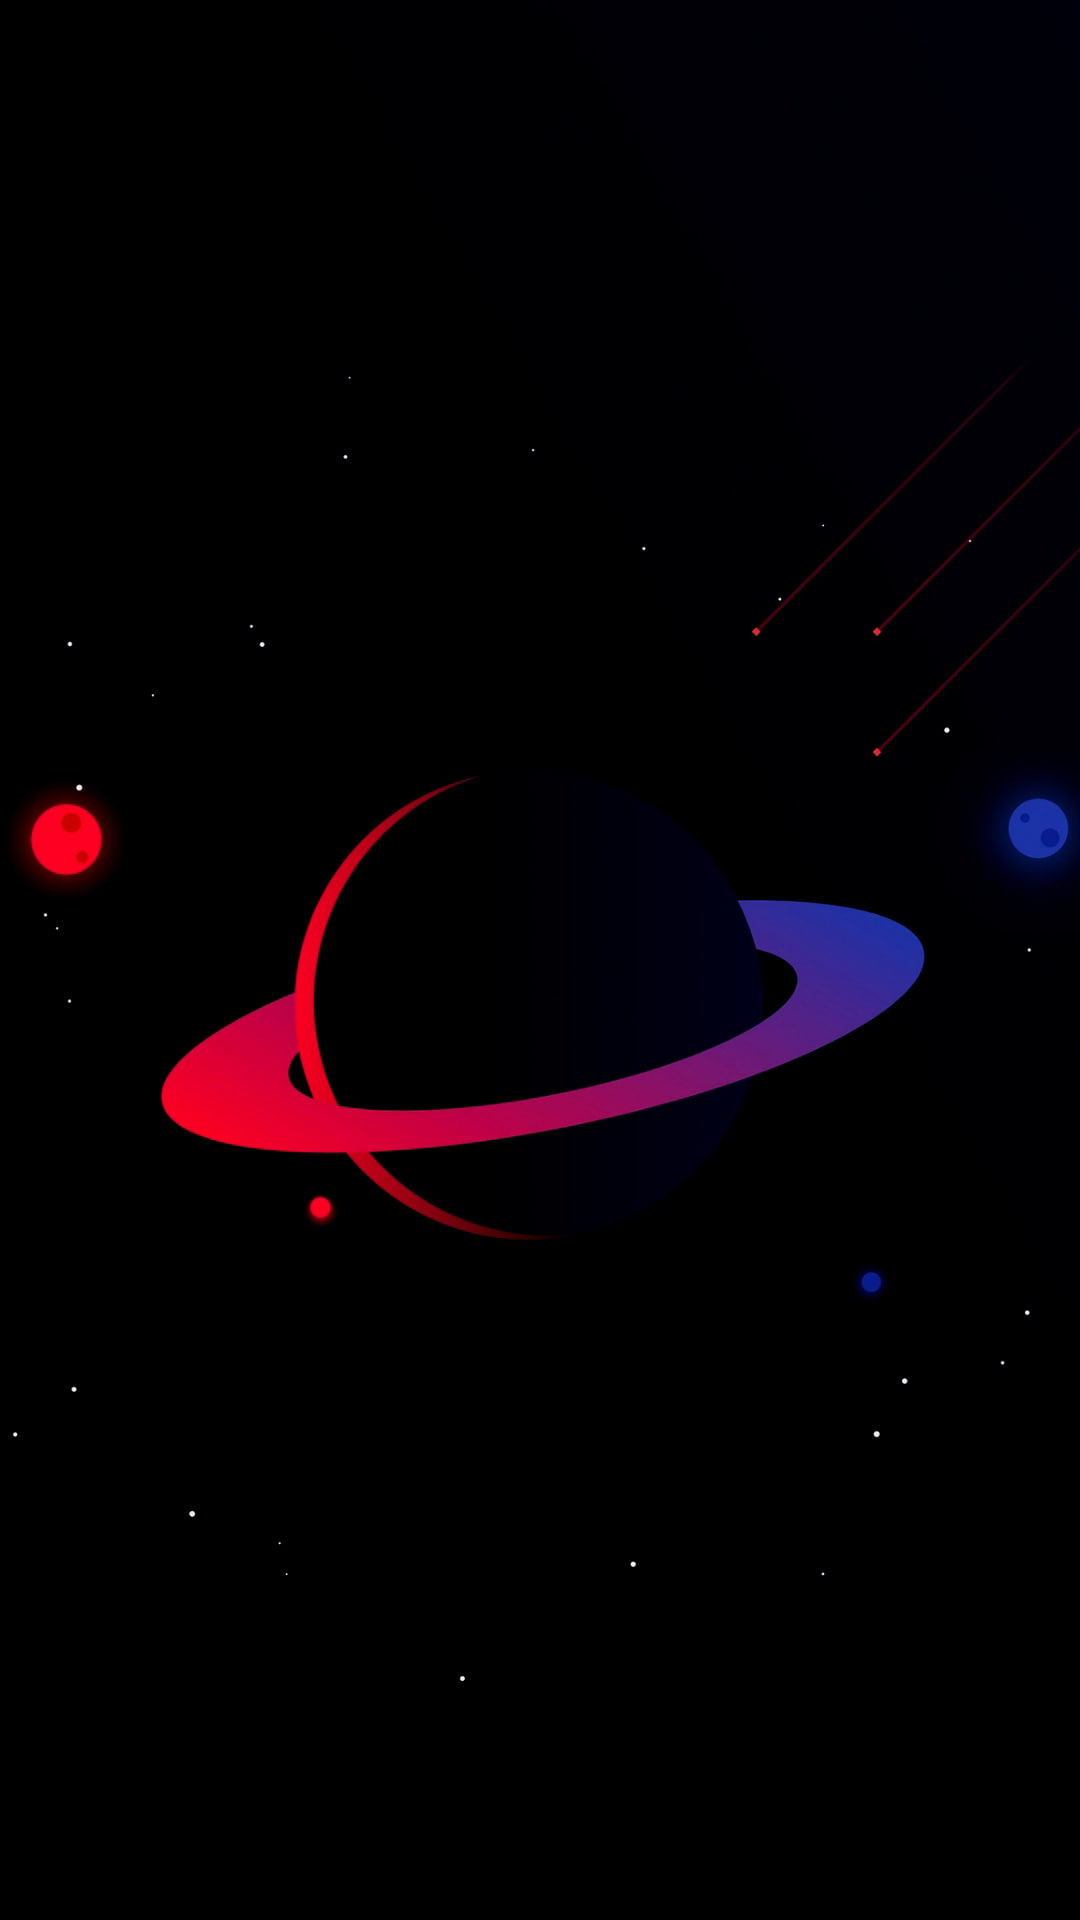 artwork, Saturn, space, space art, colorful, planet, planetary rings